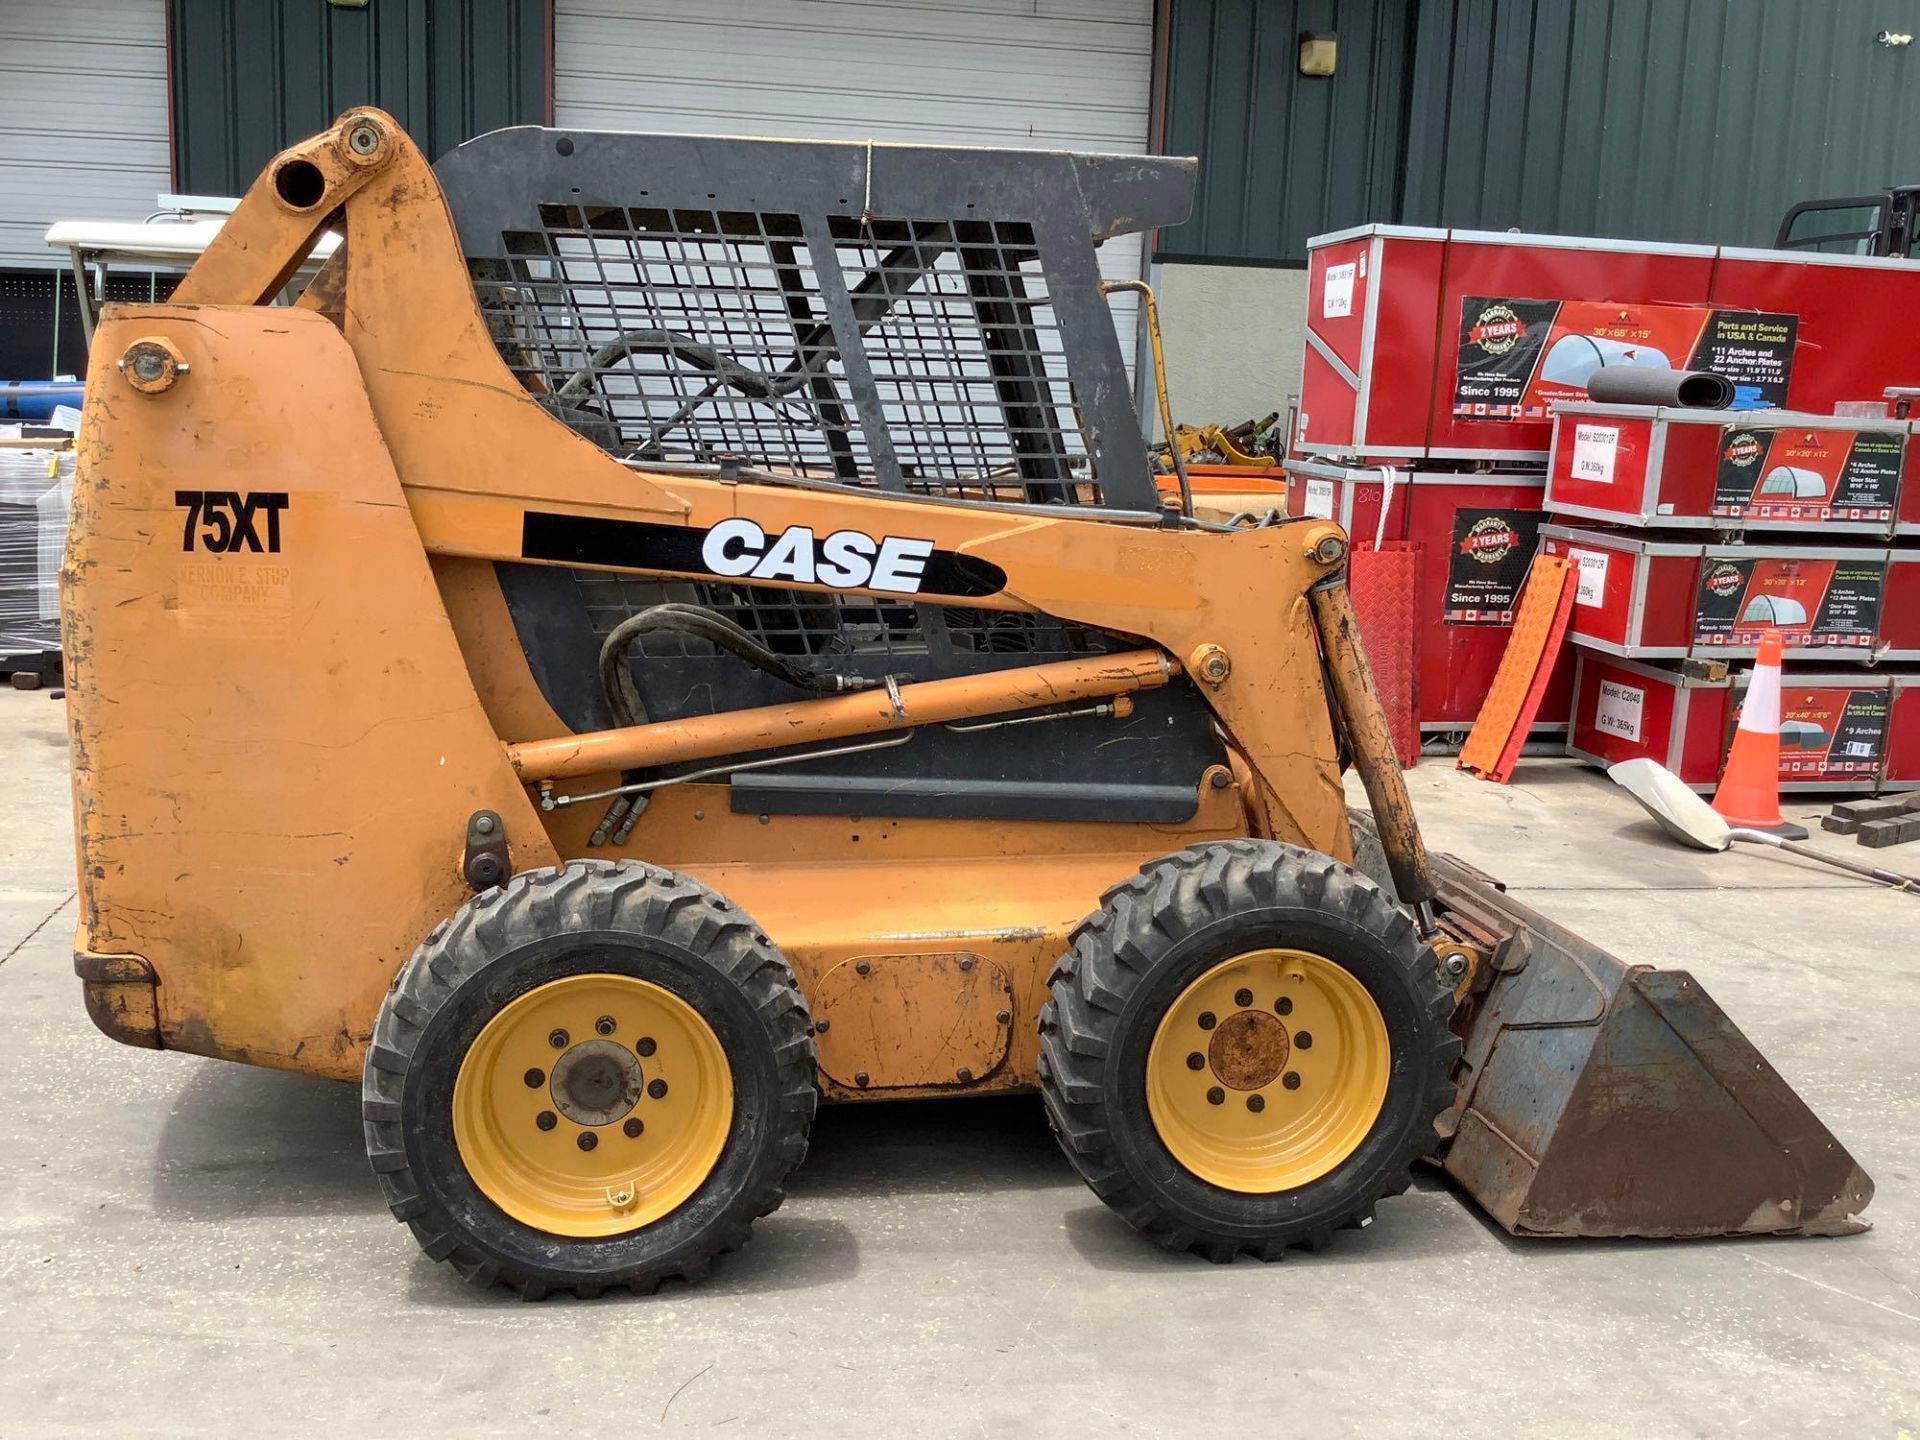 CASE SKID STEER MODEL 75XT, DIESEL, BUCKET APPROX 73” W, RUNS AND OPERATES - Image 9 of 22